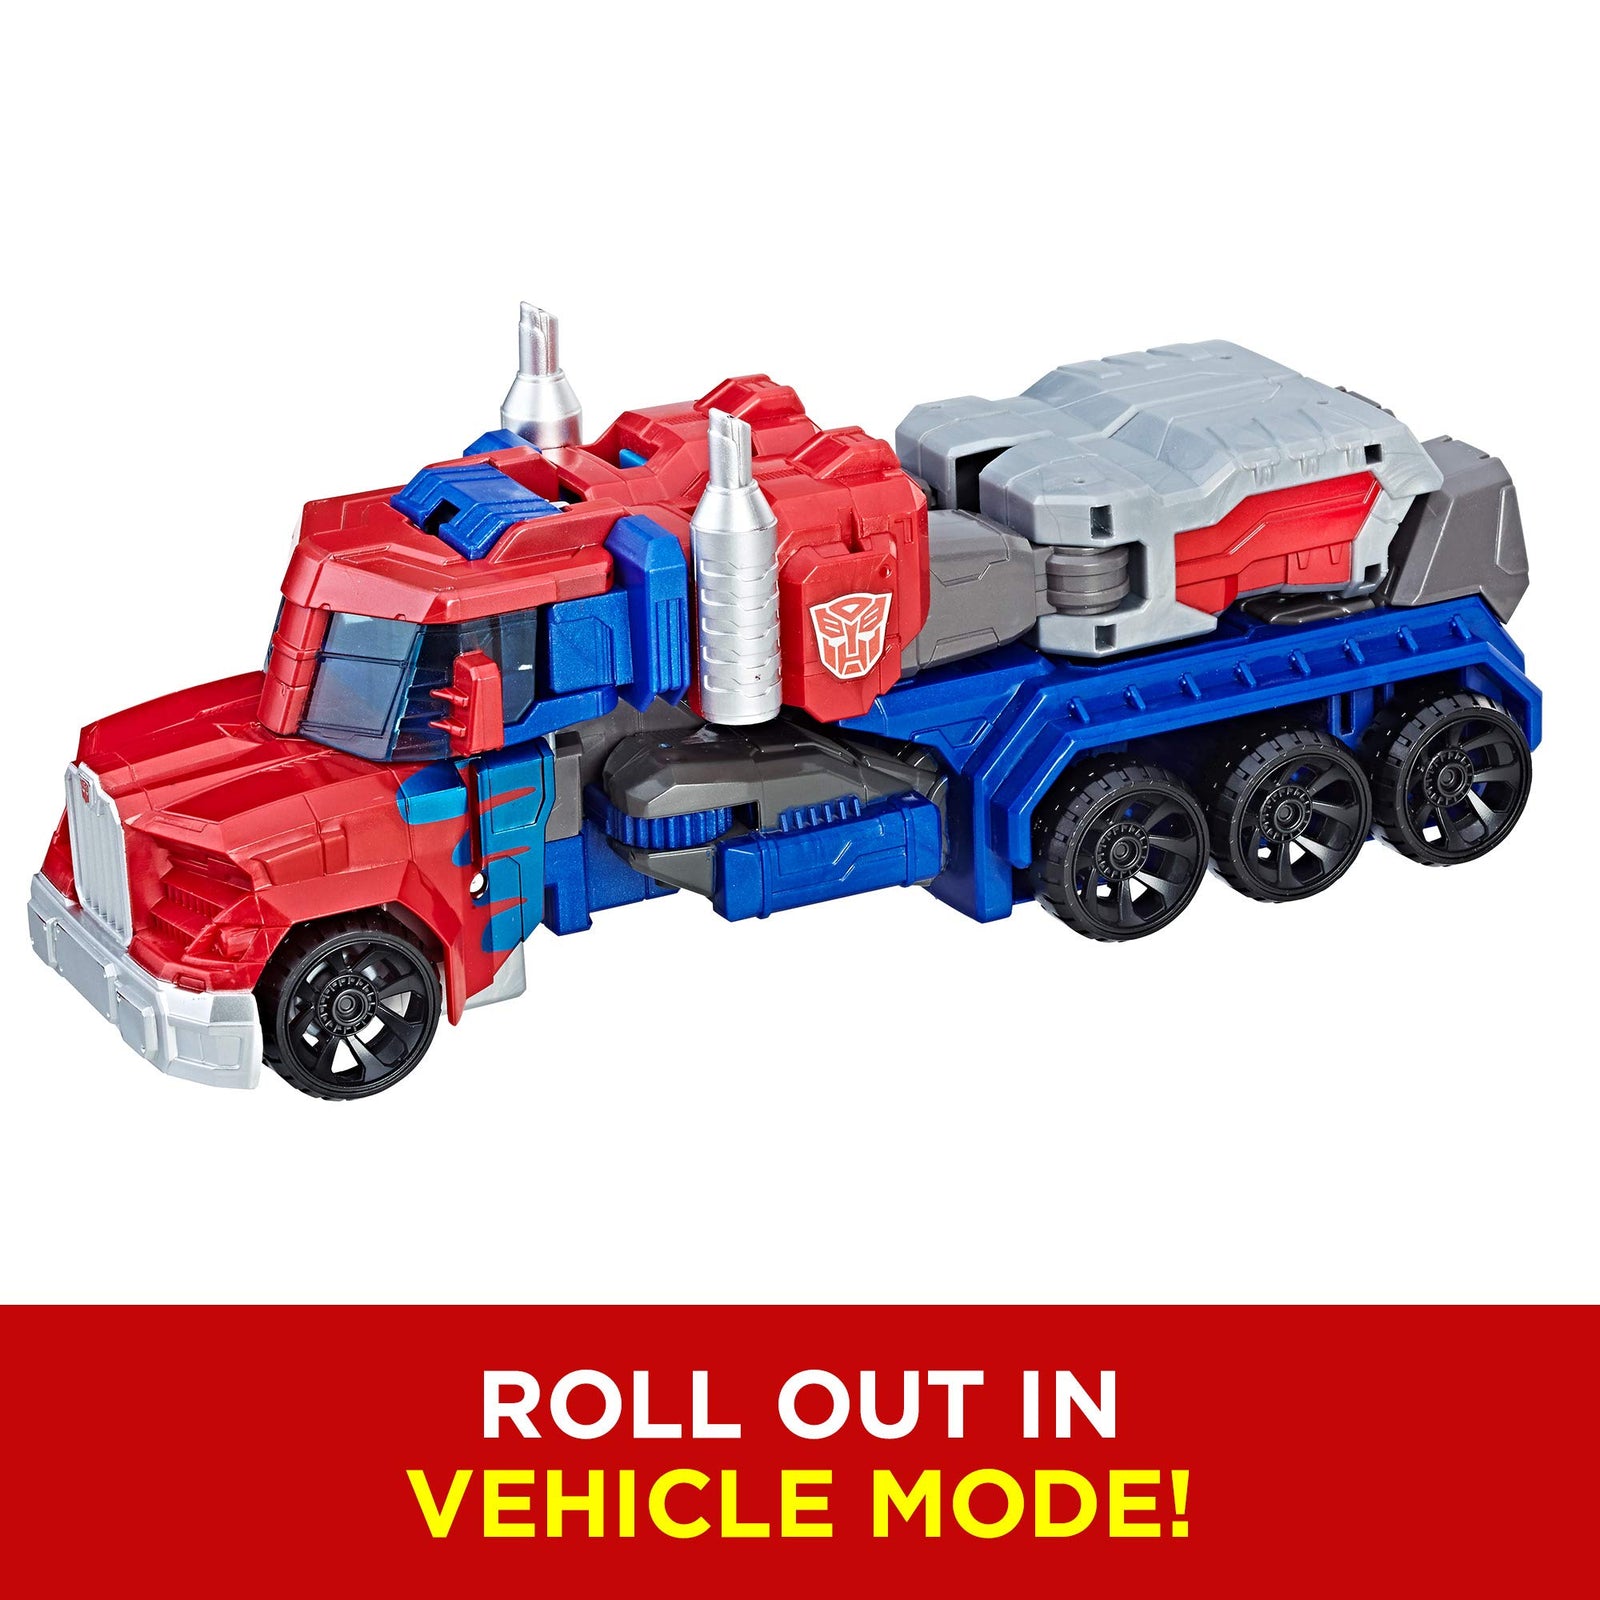 Transformers Toys Heroic Optimus Prime Action Figure - Timeless Large-Scale Figure, Changes into Toy Truck - Toys for Kids 6 and Up, 11-inch(Amazon Exclusive)